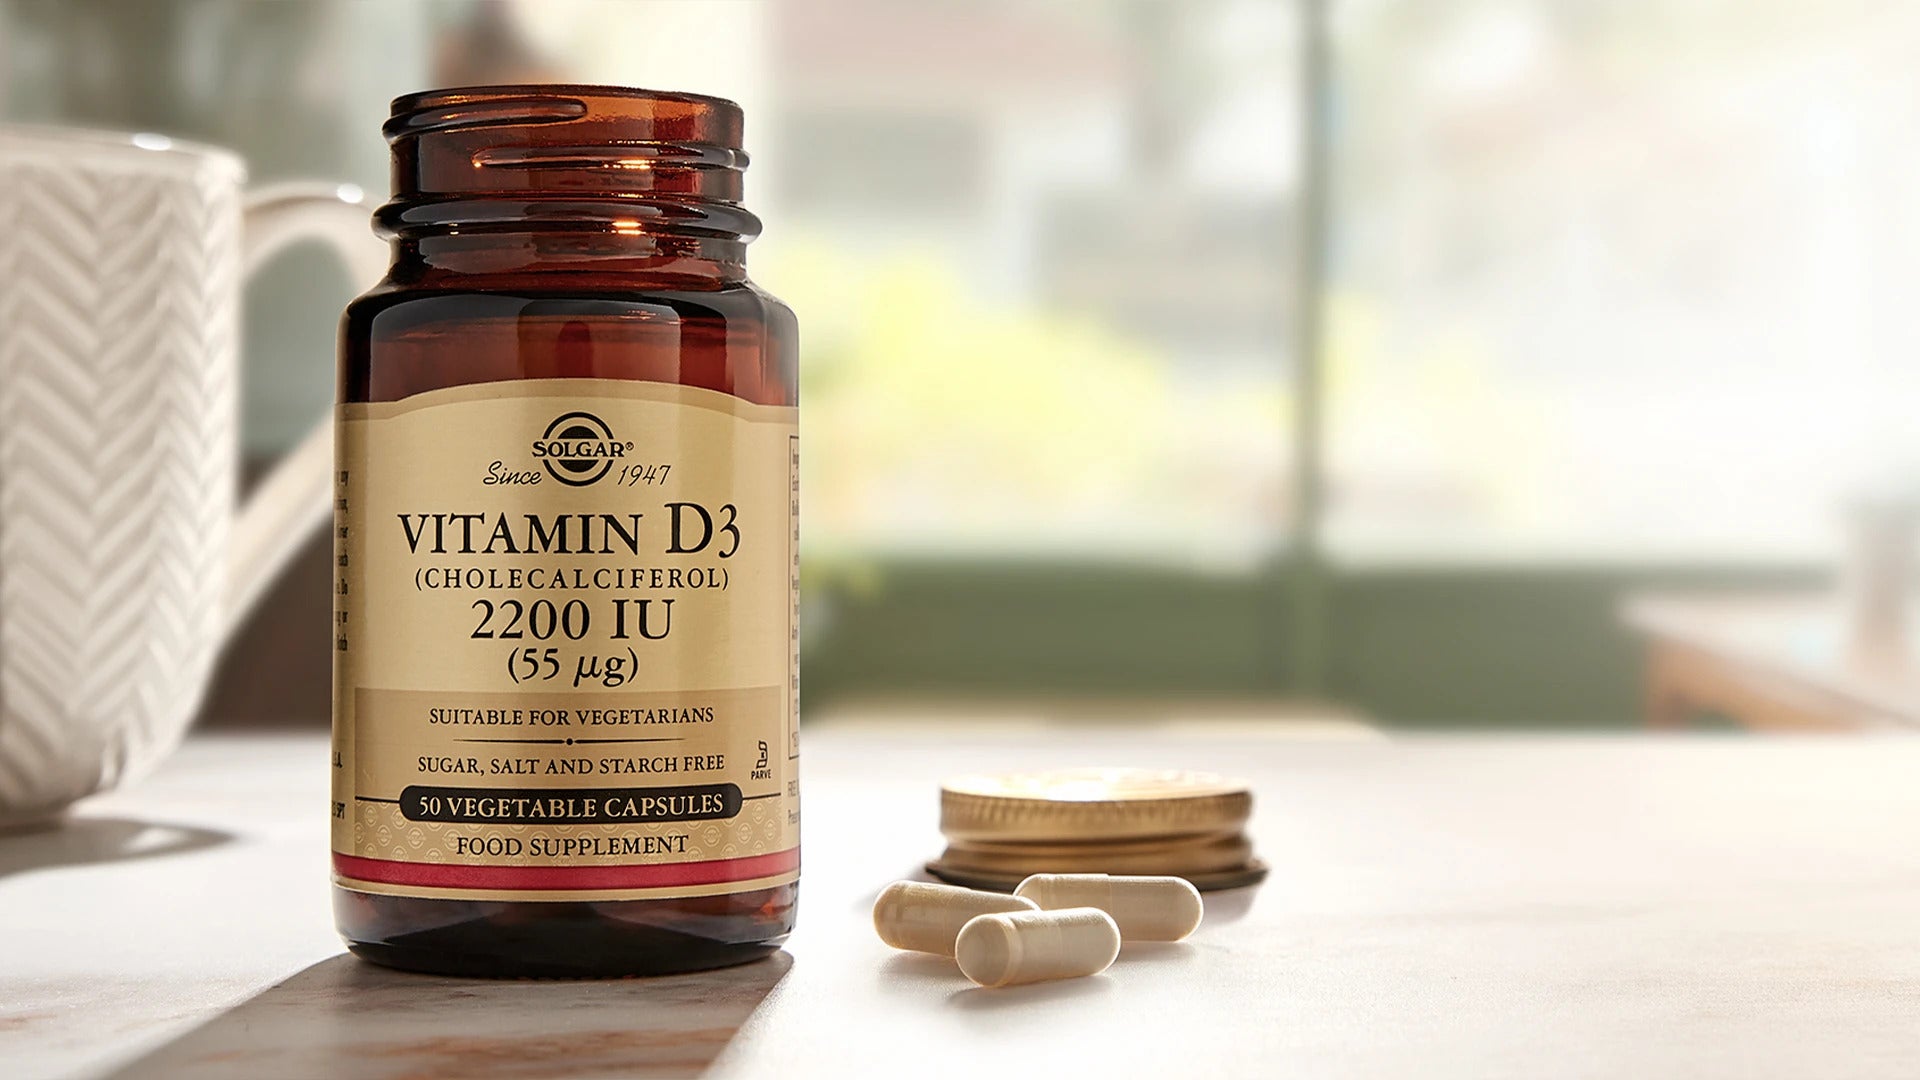 Vitamin D3 and its role in the immune system